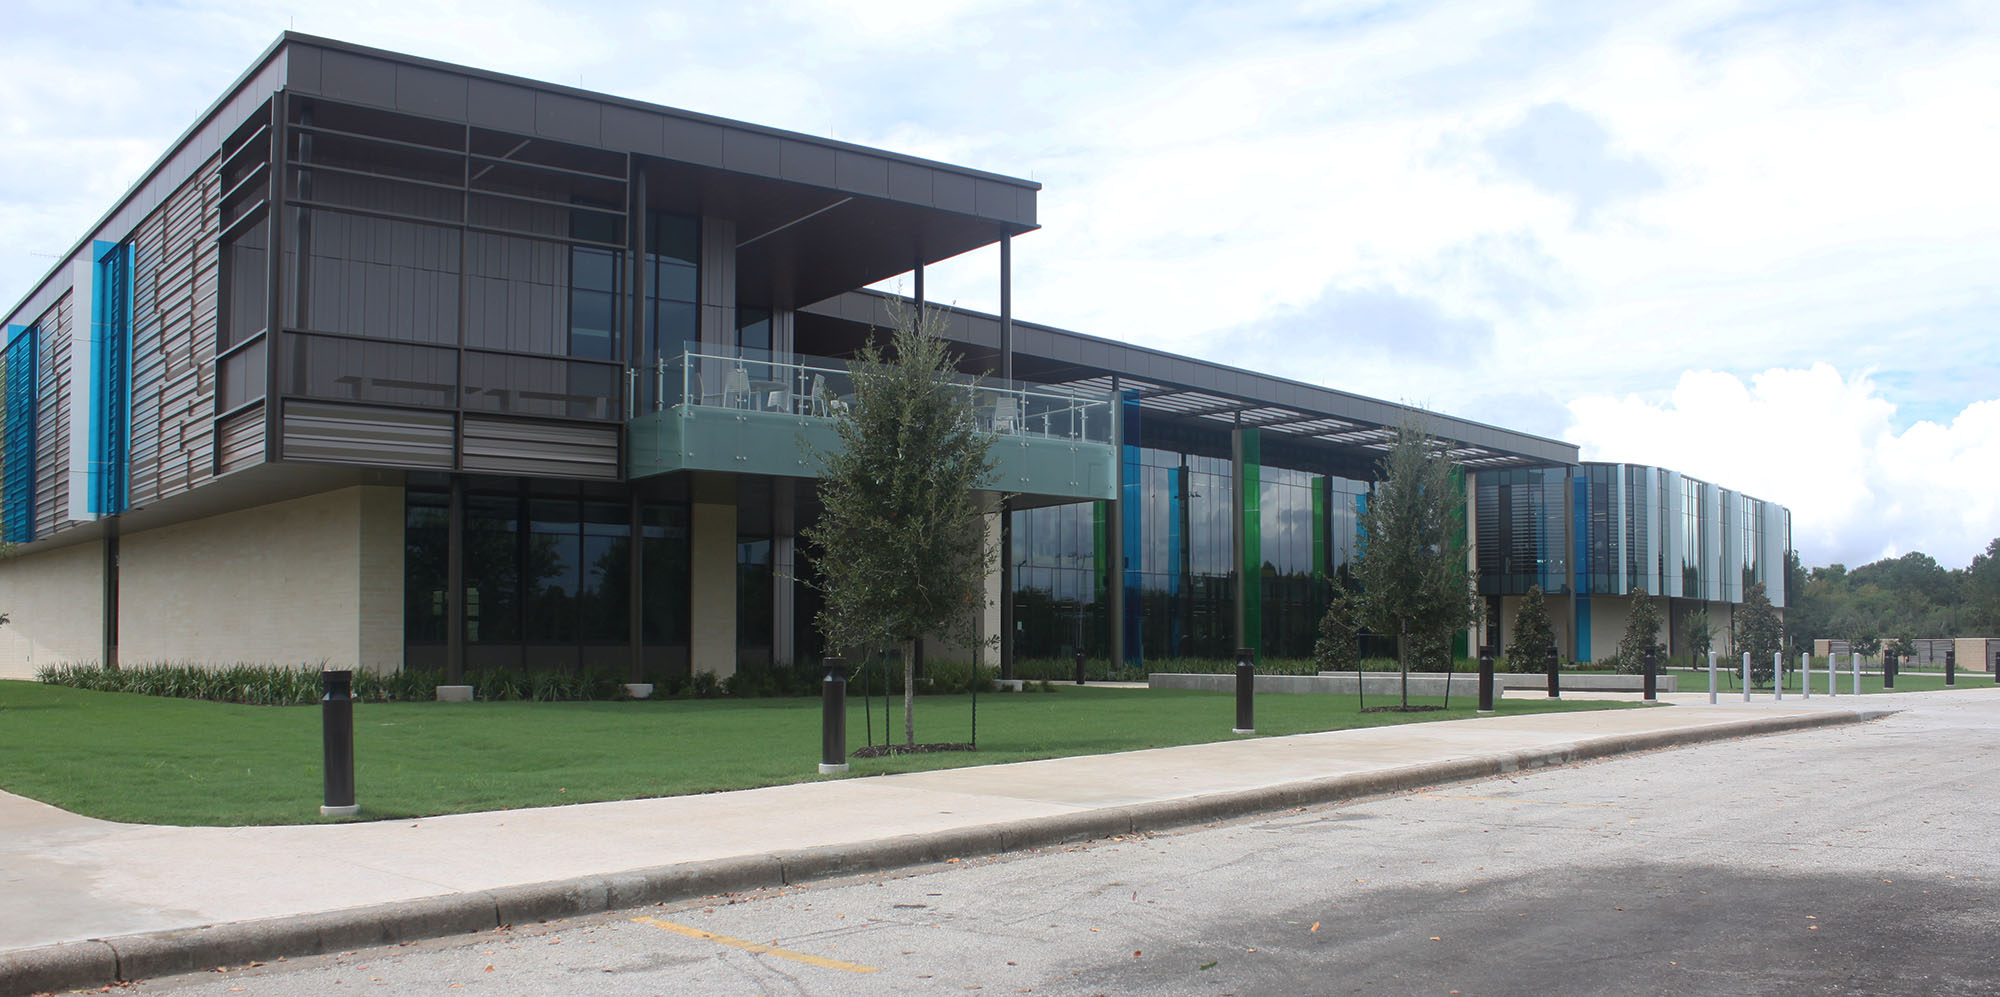 PHOTO: UHCL's new Recreation and Wellness Center. Photo by The Signal reporter Shae Blehm